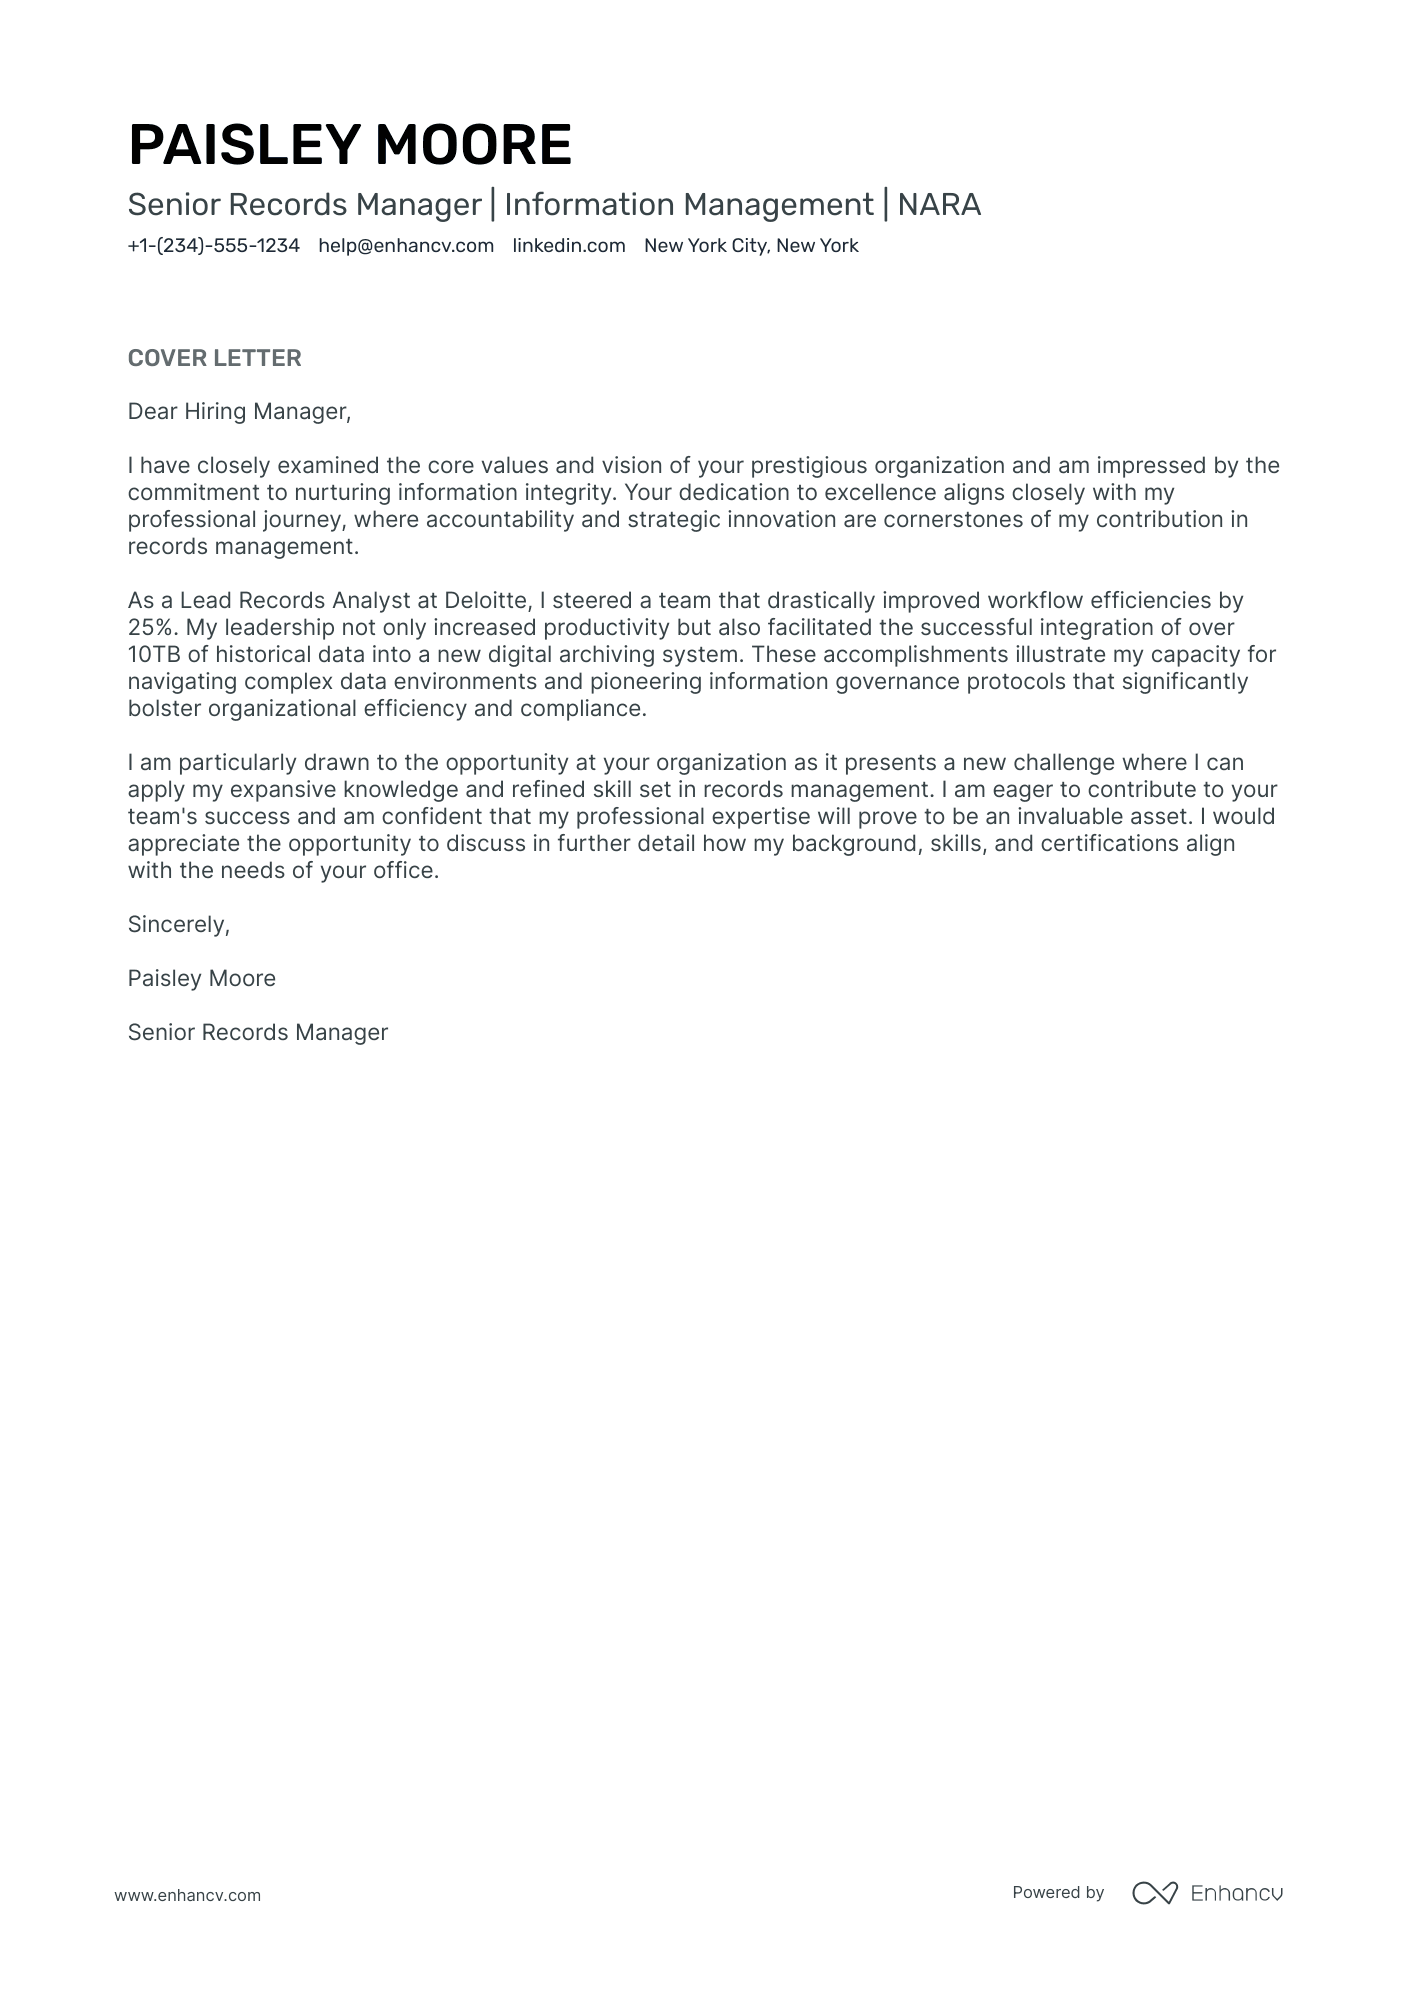 cover letter for audit report